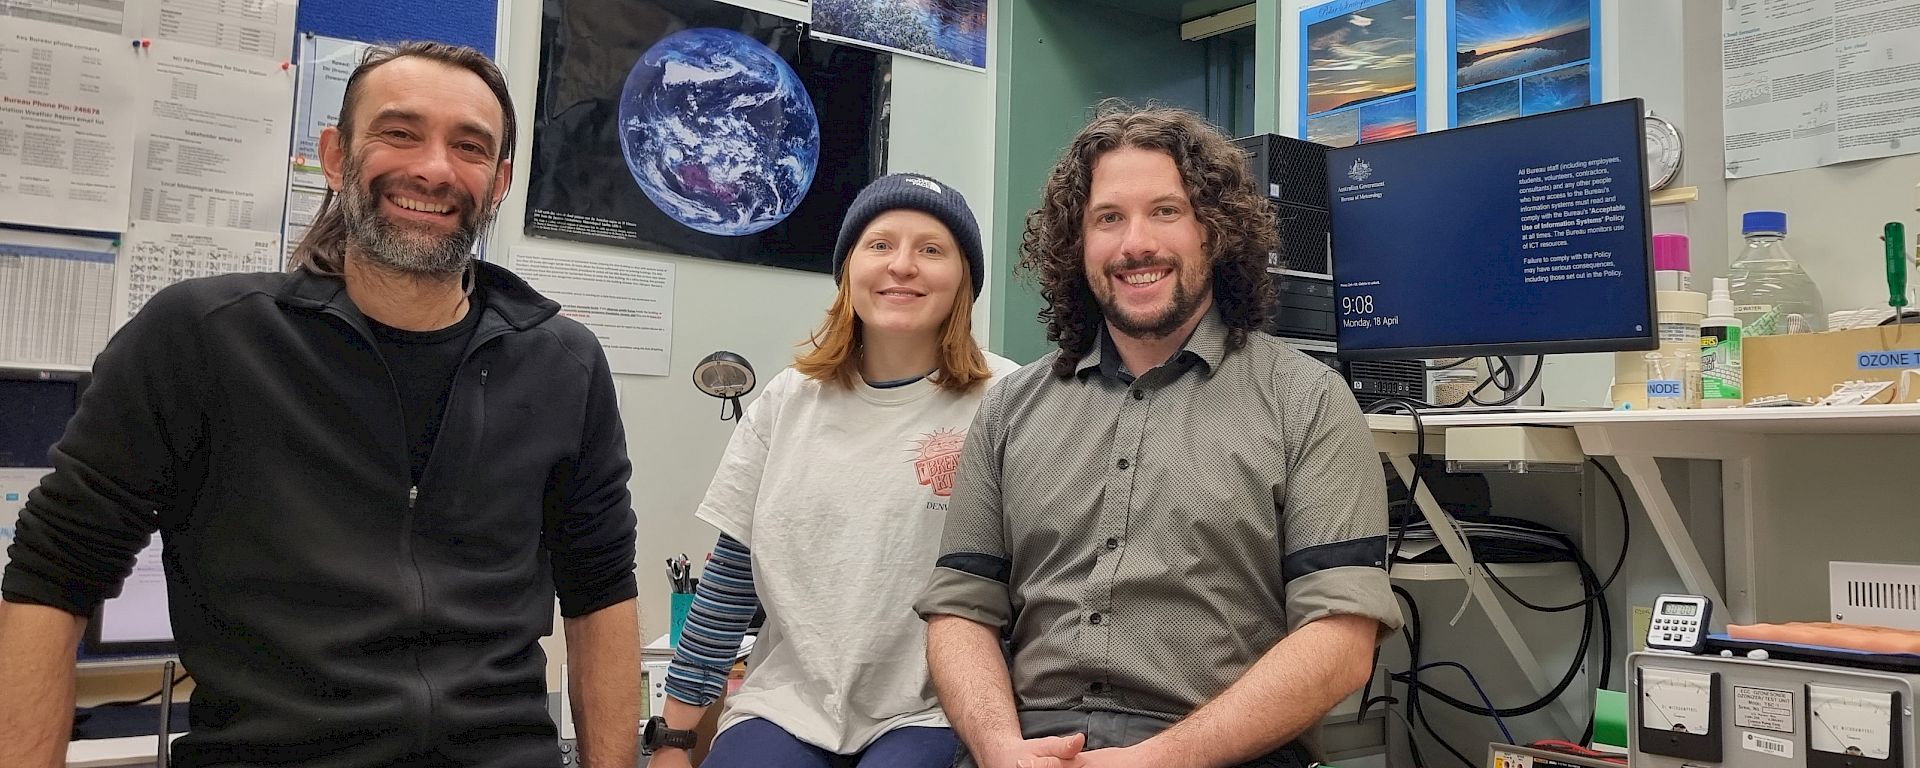 3 expeditioners sit in an office with images and a computer screen showing weather data in the background.